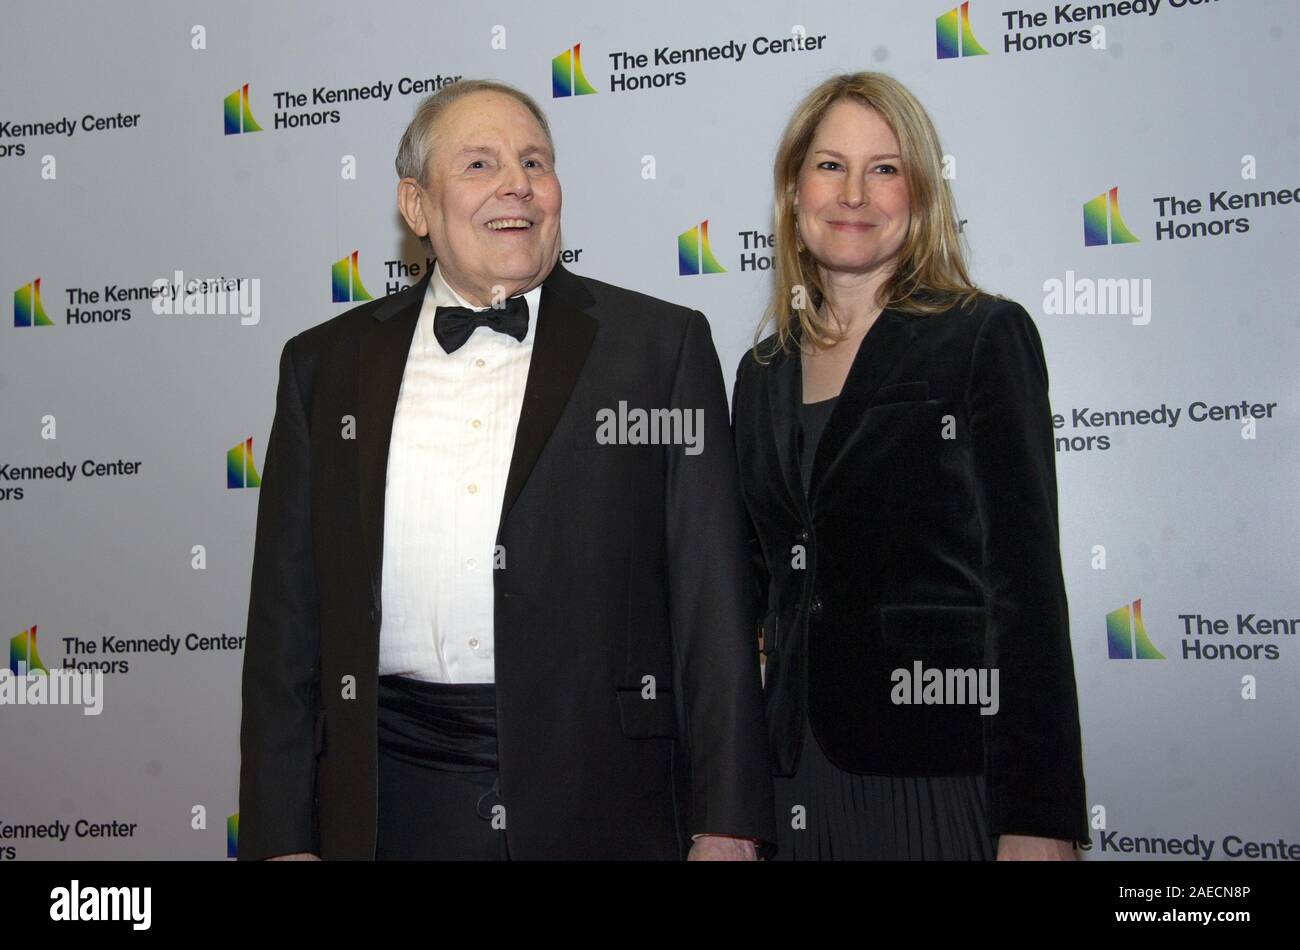 Washington, District of Columbia, USA. 7th Dec, 2019. Jeffrey A. Legum and guest arrive for the formal Artist's Dinner honoring the recipients of the 42nd Annual Kennedy Center Honors at the United States Department of State in Washington, DC on Saturday, December 7, 2019. The 2019 honorees are: Earth, Wind & Fire, Sally Field, Linda Ronstadt, Sesame Street, and Michael Tilson Thomas Credit: Ron Sachs/CNP/ZUMA Wire/Alamy Live News Stock Photo